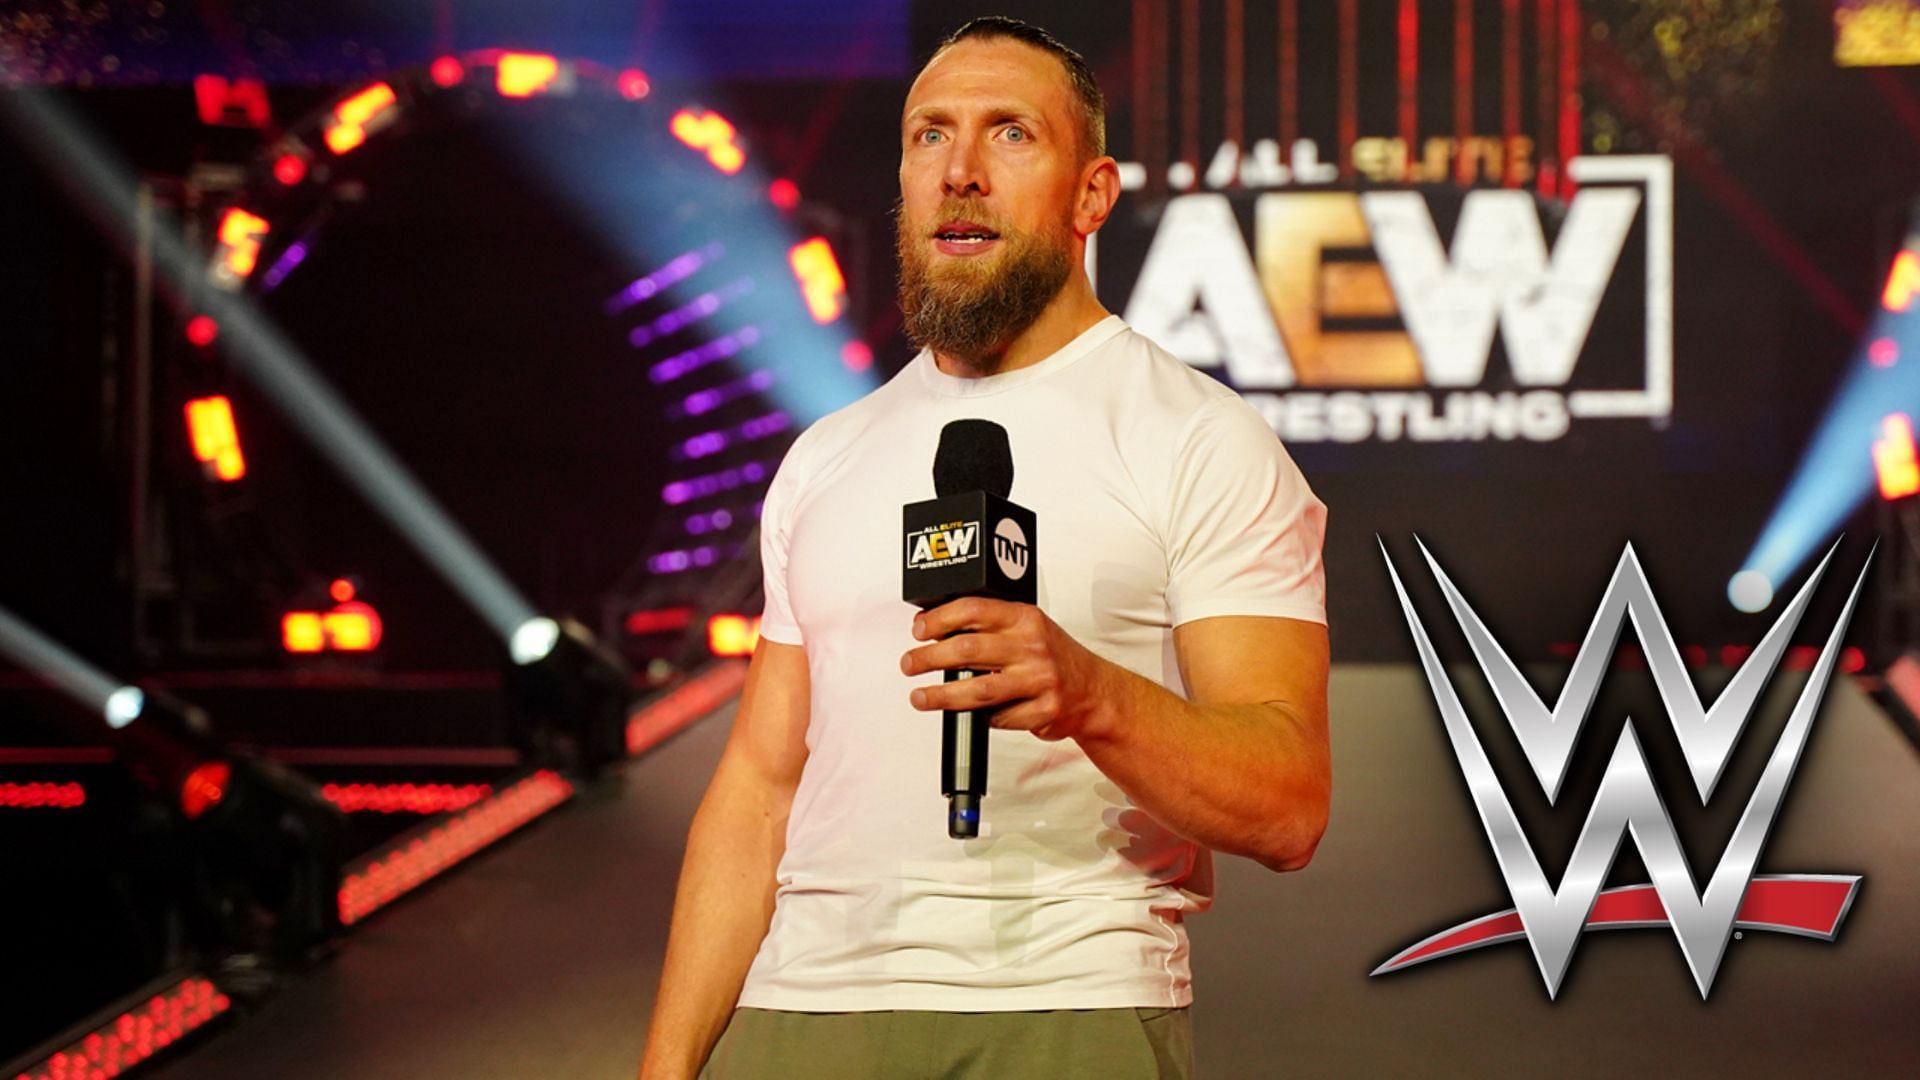 Bryan Danielson had some interesting comments this week